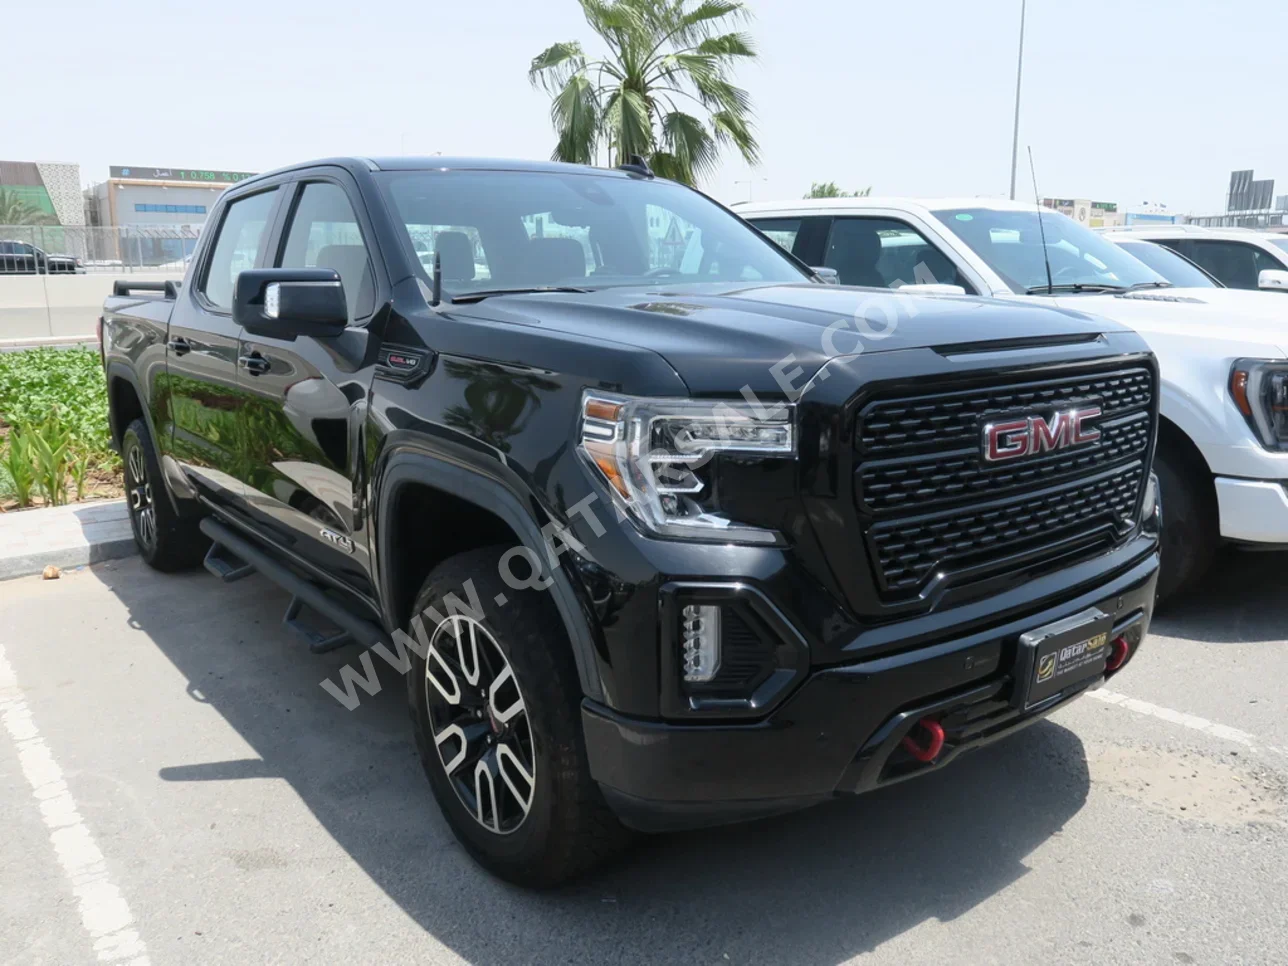 GMC  Sierra  AT4  2019  Automatic  134,000 Km  8 Cylinder  Four Wheel Drive (4WD)  Pick Up  Black